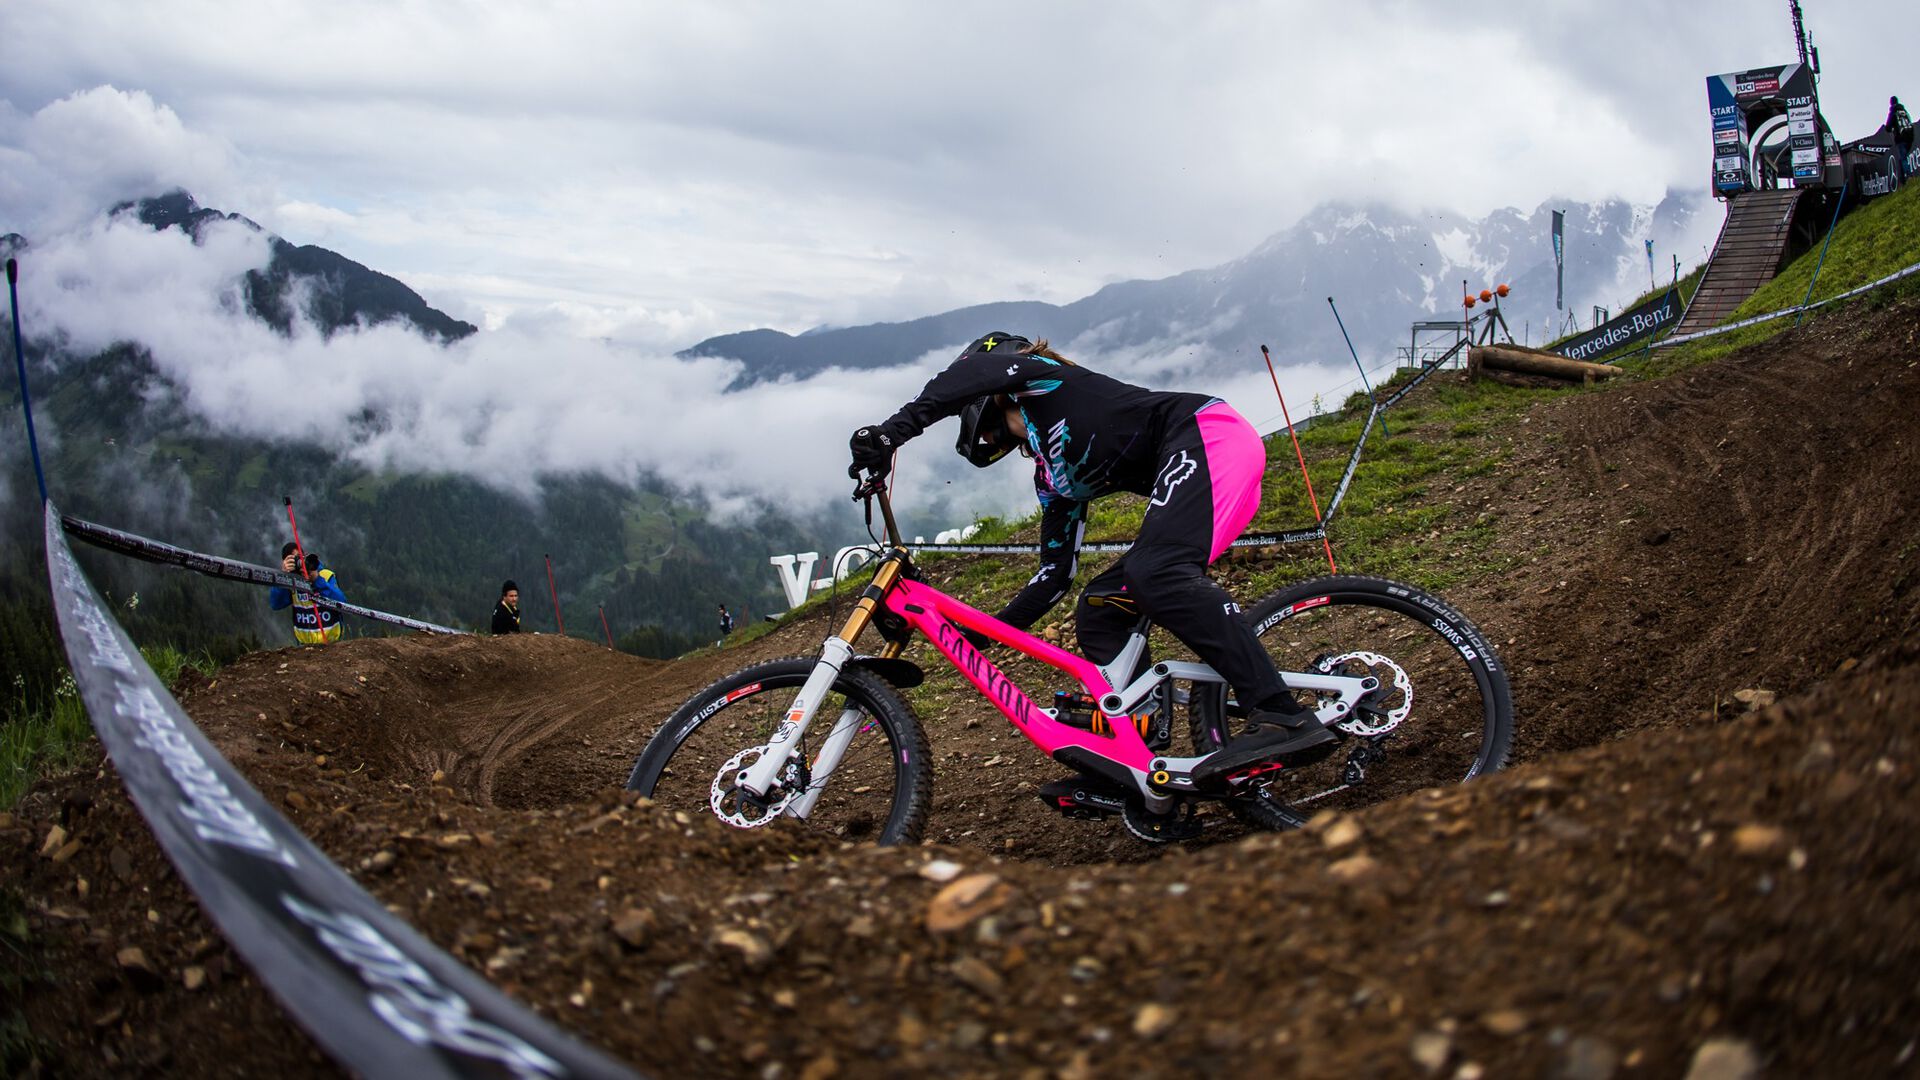 Phoebe Gale at Leogang World Cup 2021